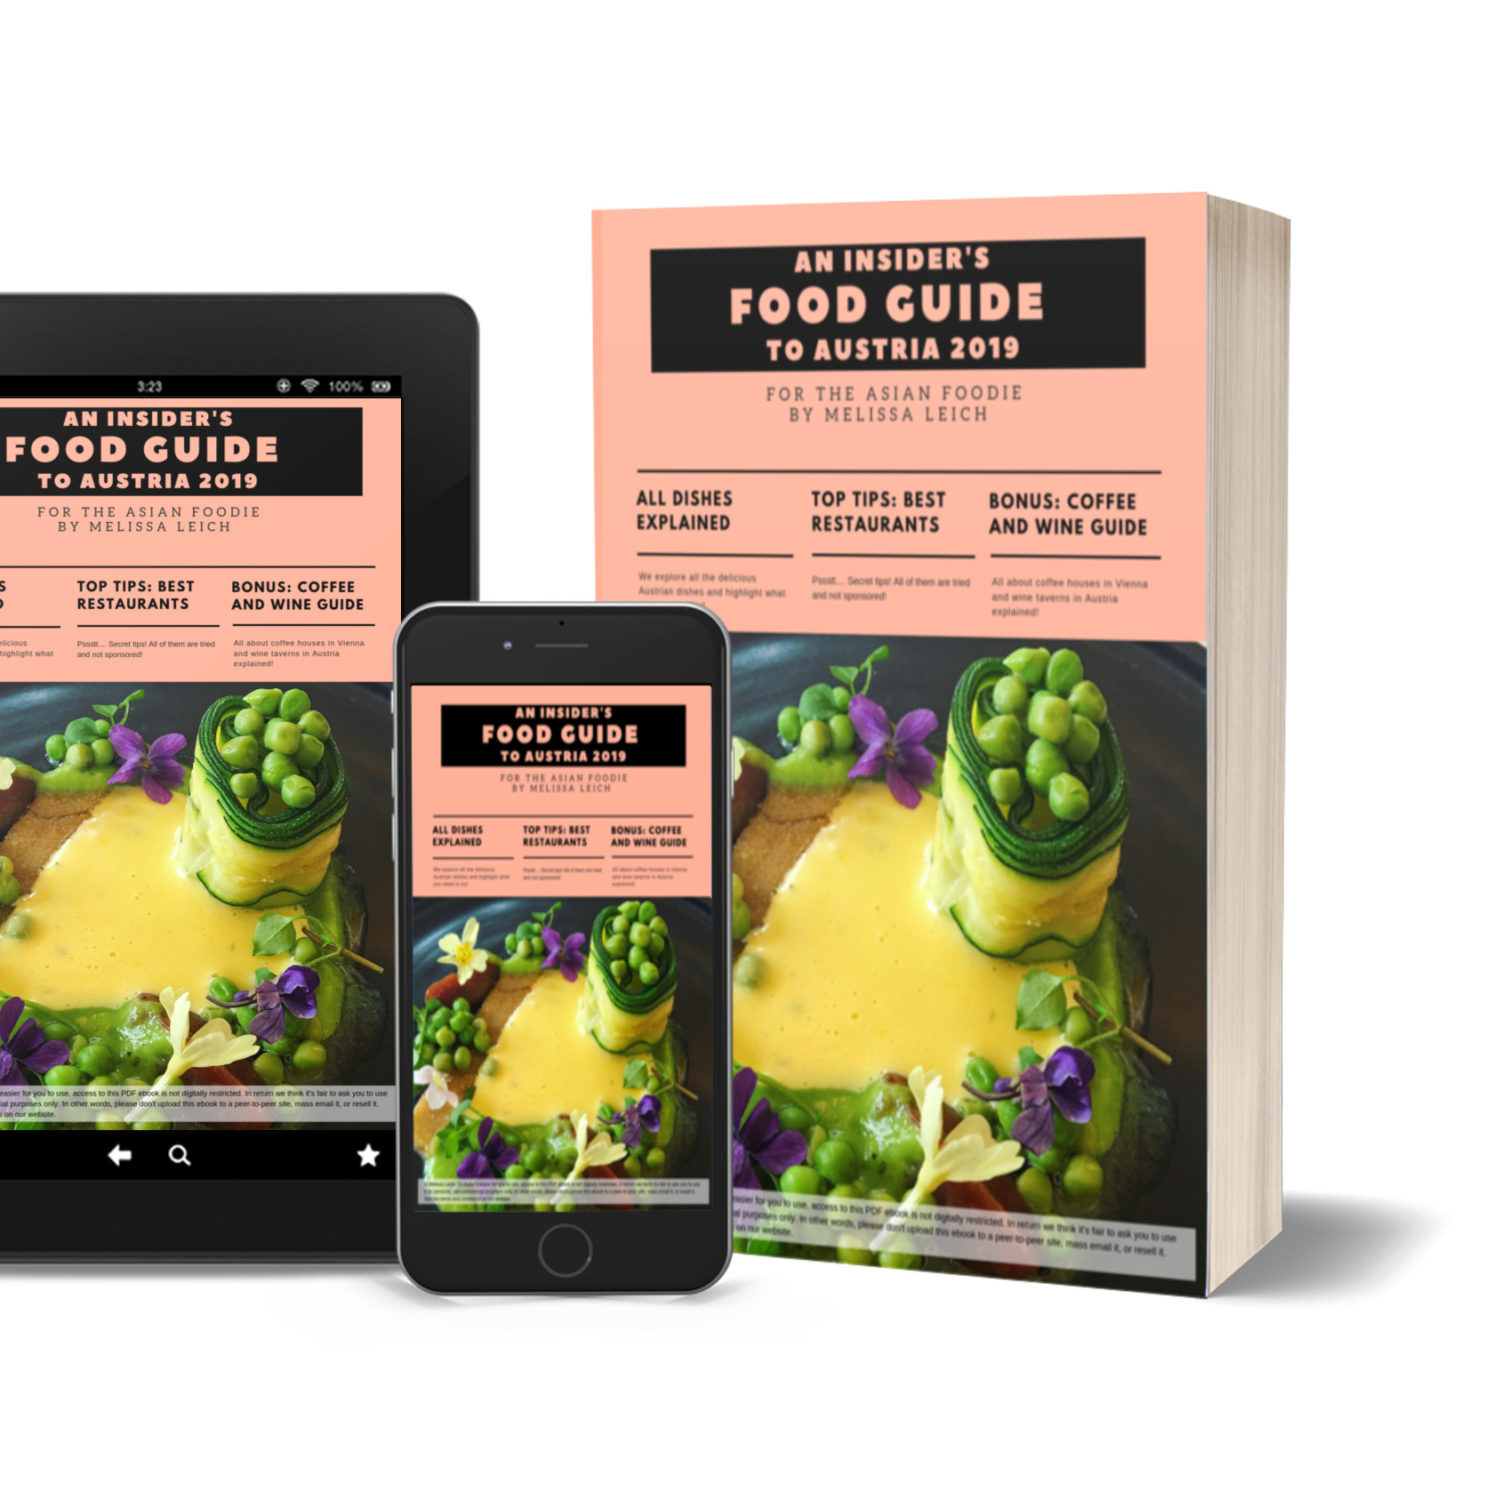 eBook: An Insider’s Food Guide to Austria (for the Asian Foodie)